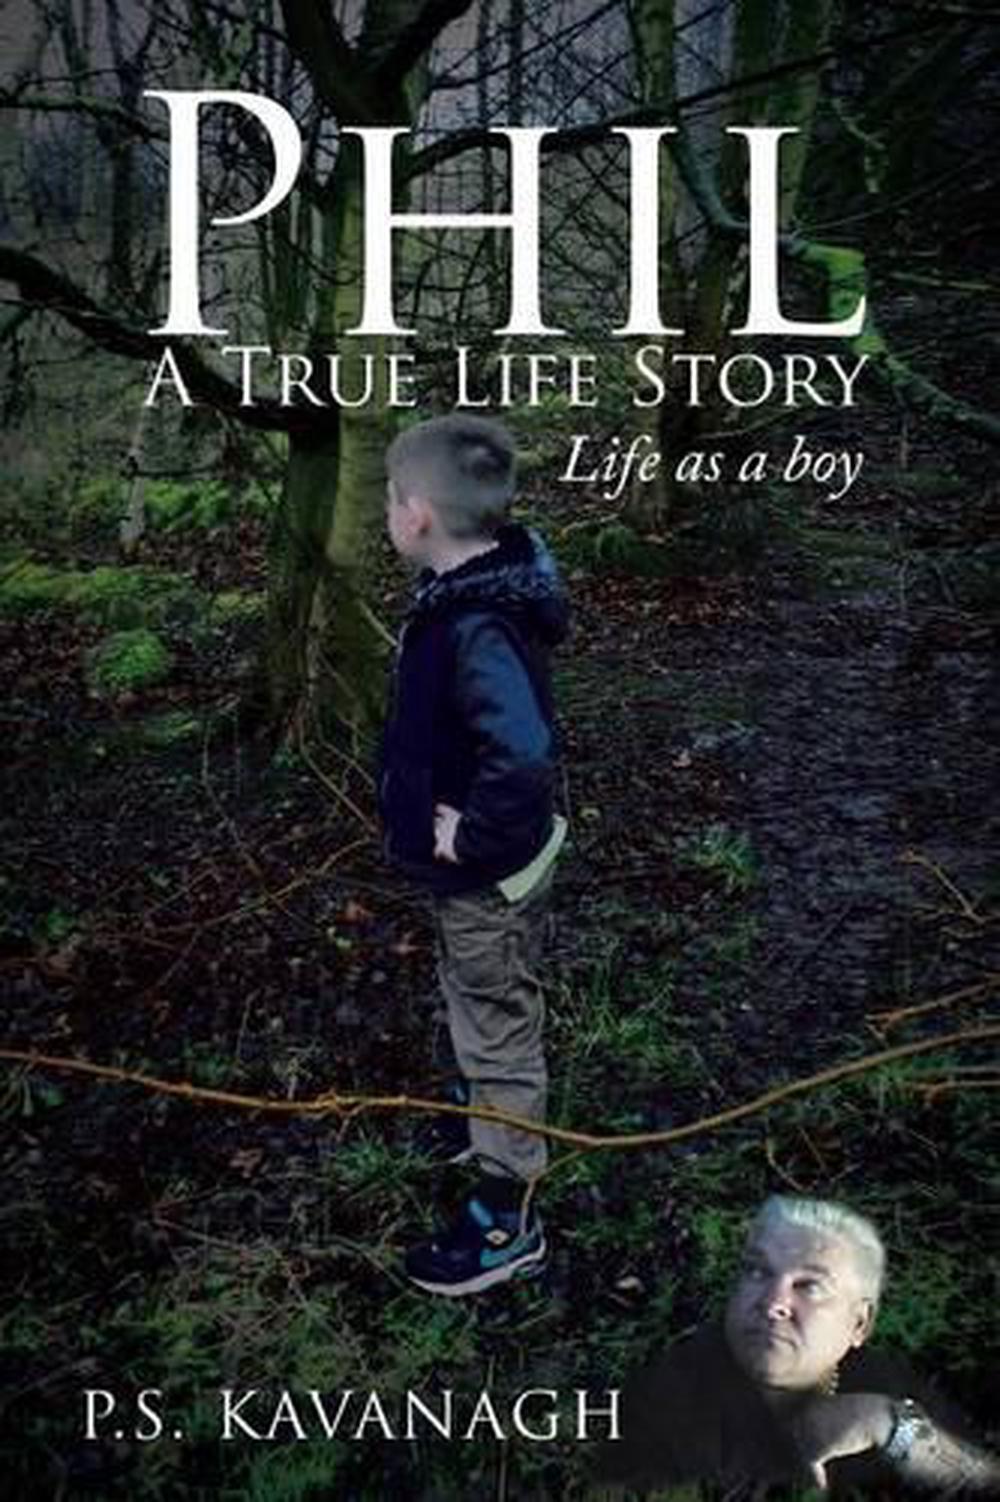 Phil A True Life Story LIFE AS A BOY by P.S. KAVANAGH (English